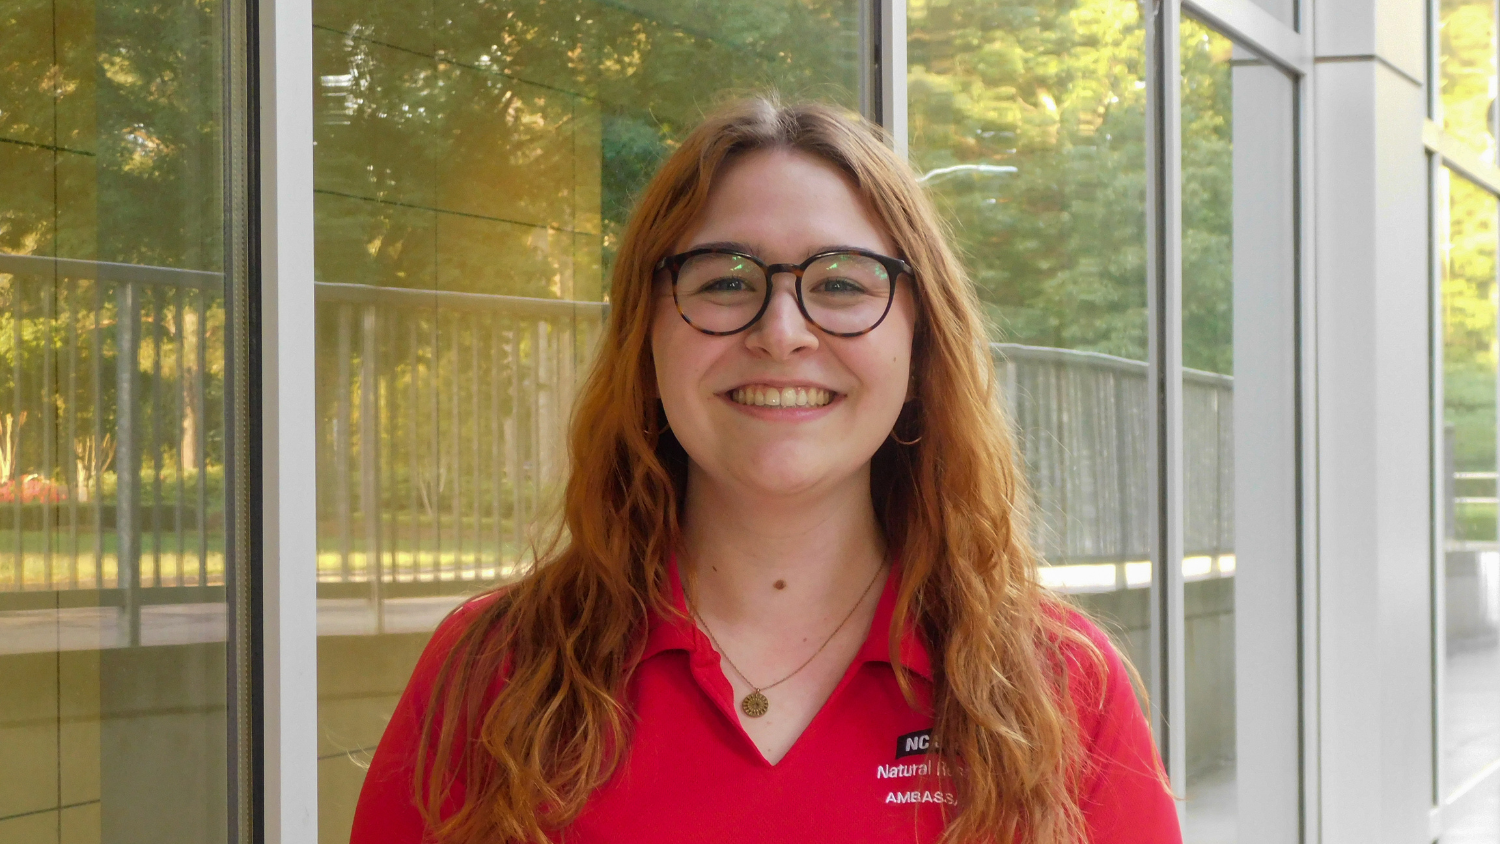 Kate MacLeod - College of Natural Resources Ambassadors - College of Natural Resources at NC State University